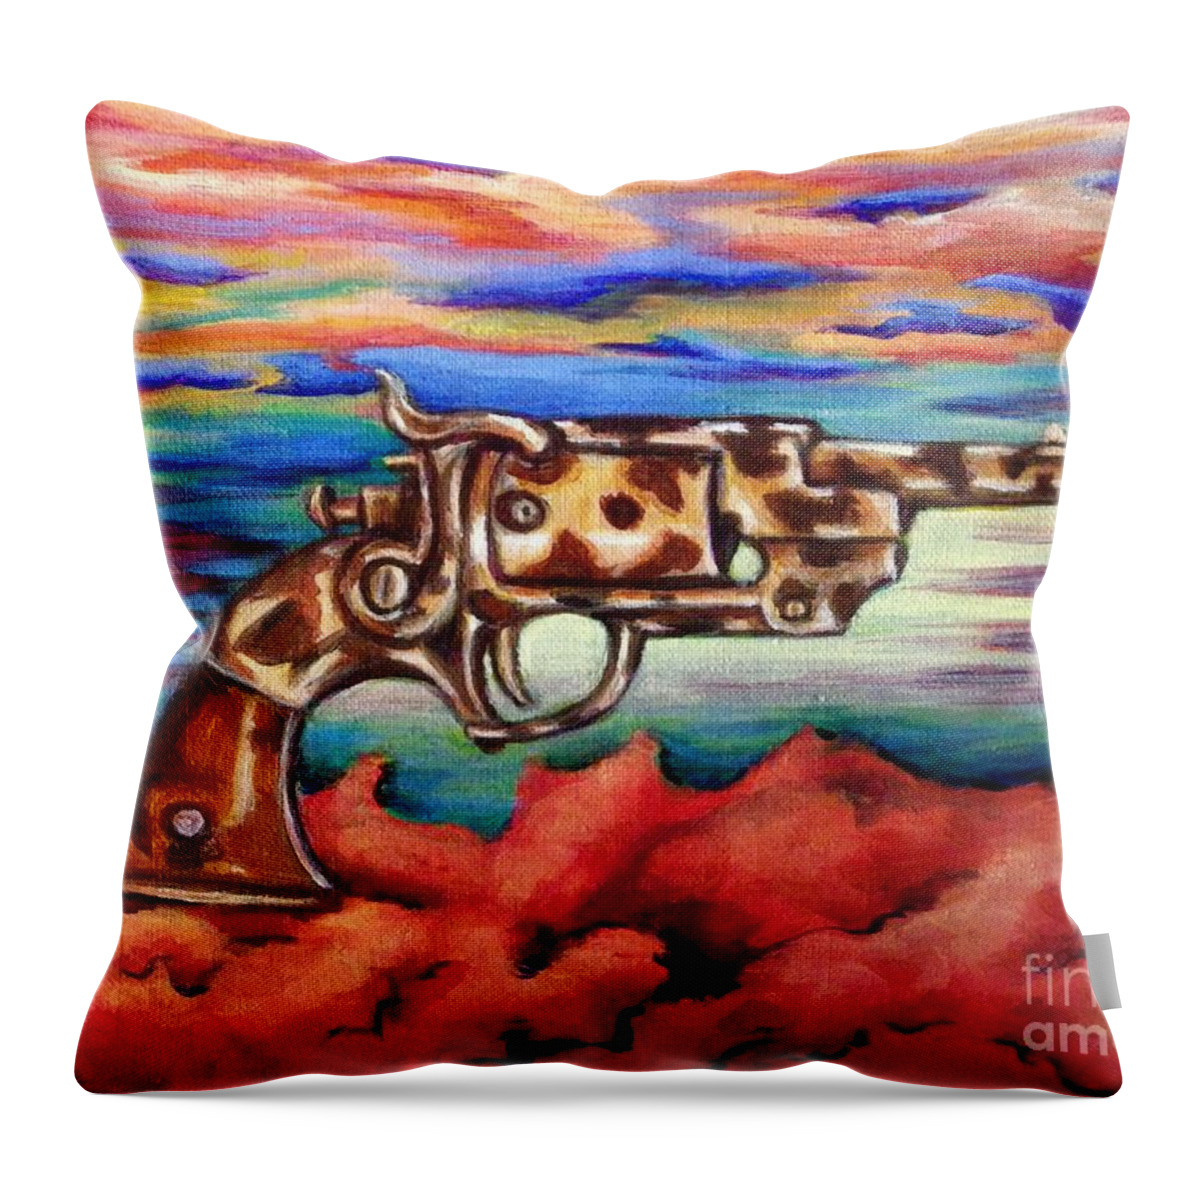 Guns Throw Pillow featuring the painting Conceal and Dairy by Linda Markwardt